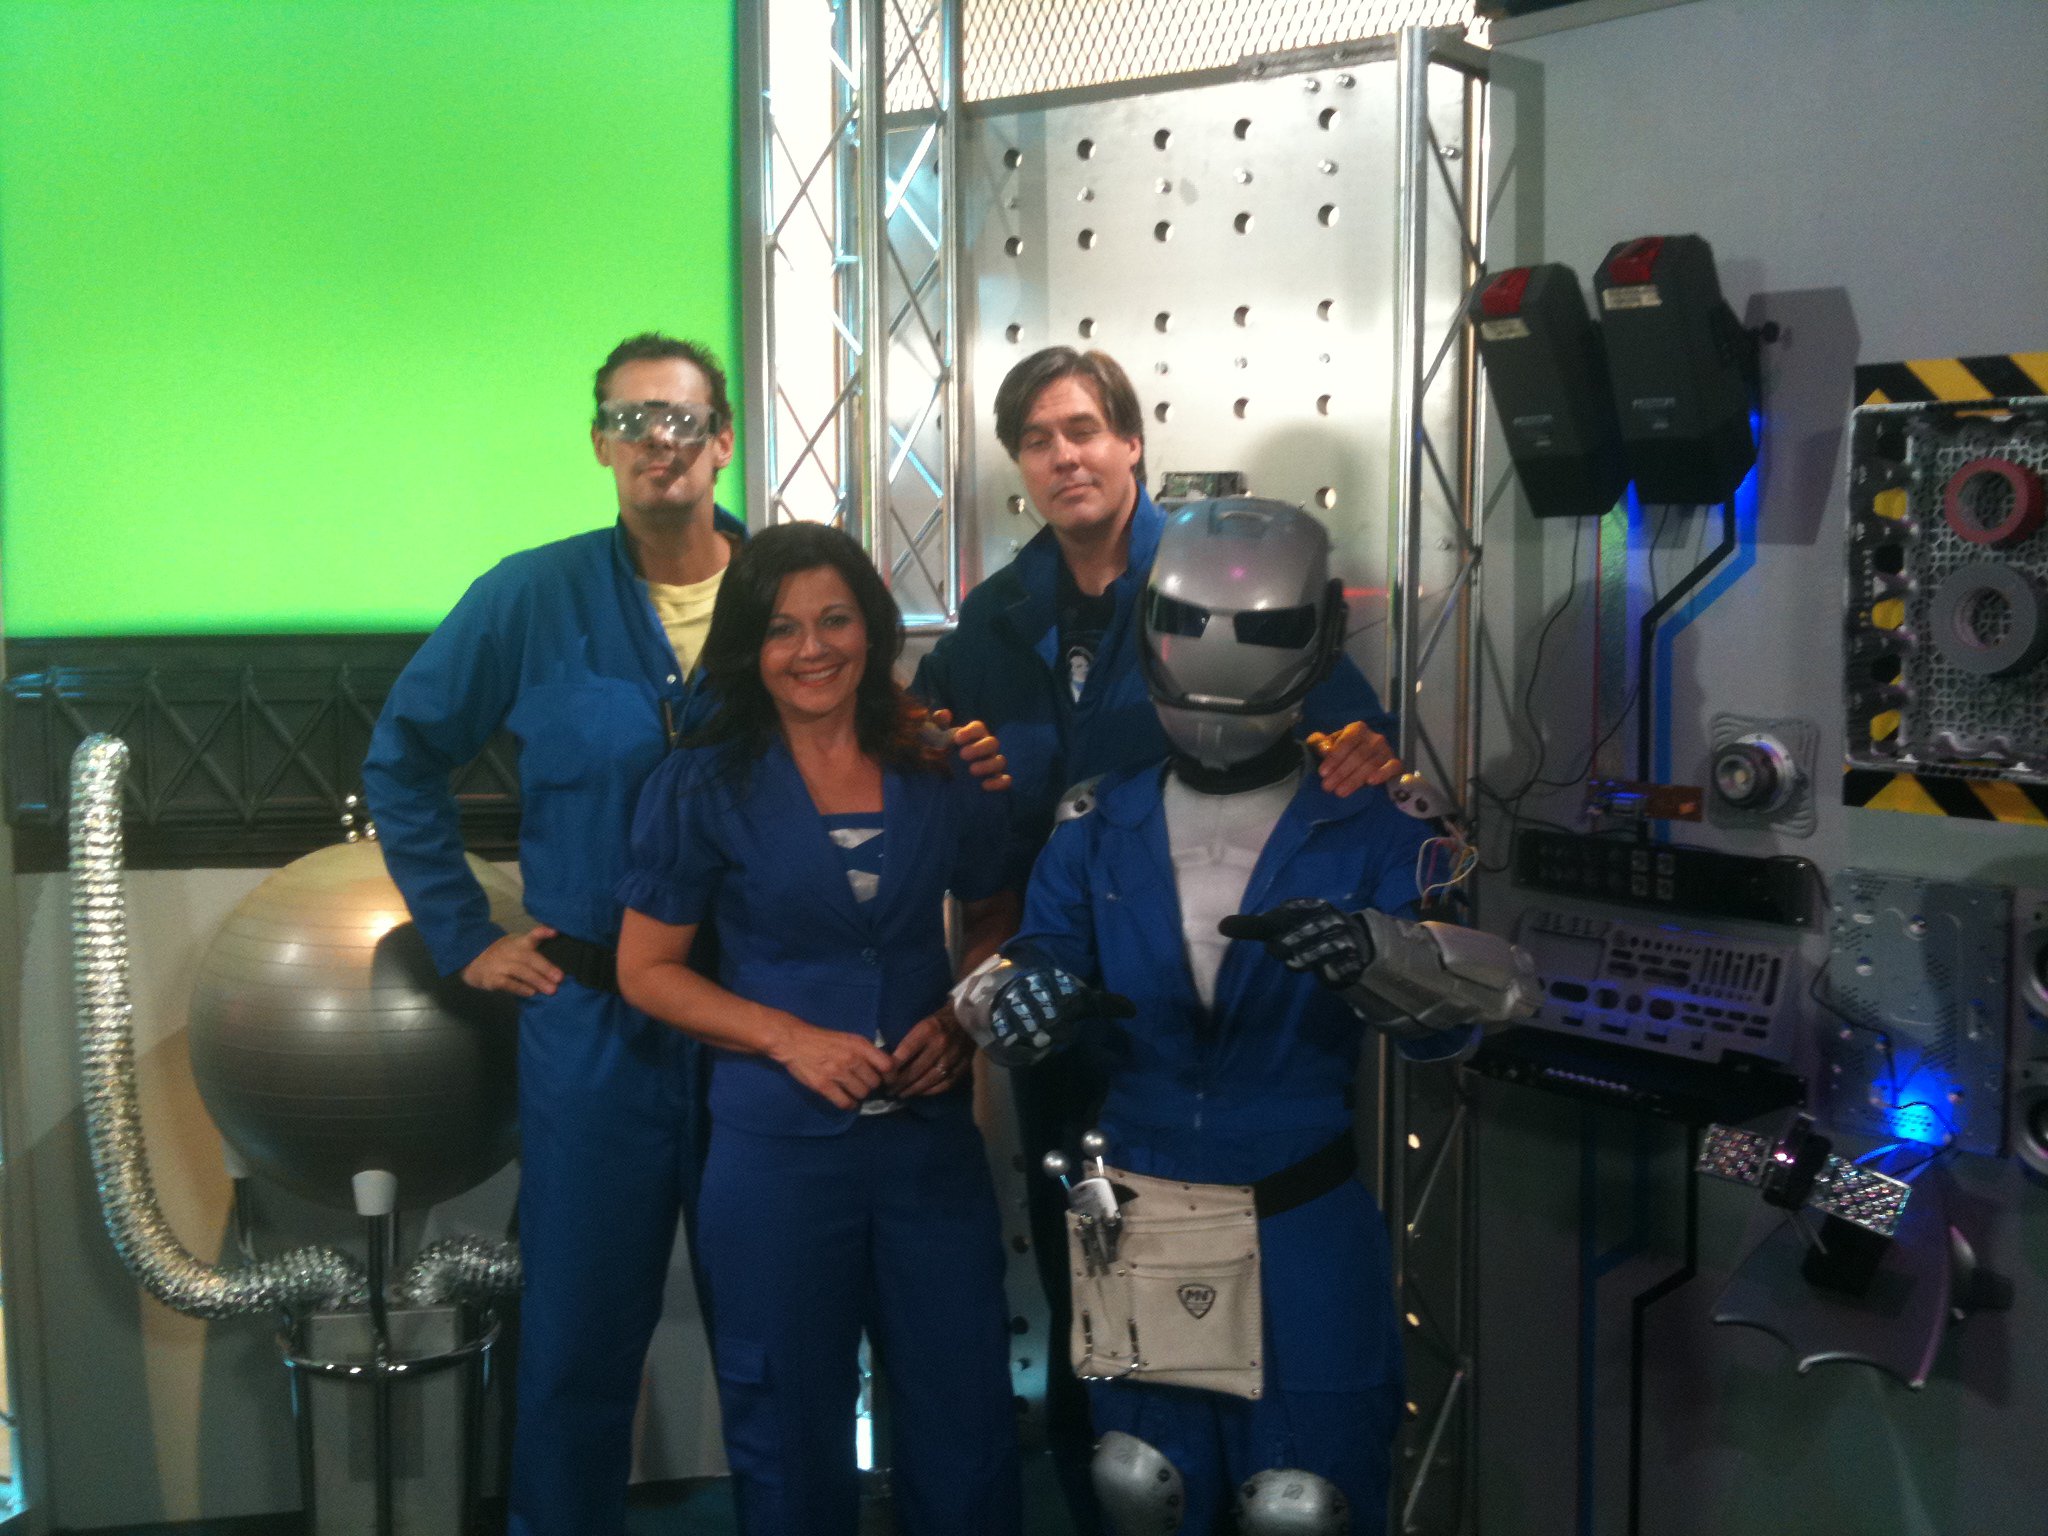 Jeremy Childs, Janet Ivey, Joshua Childs and Andrew Gumm on the set of Janet's Planet.